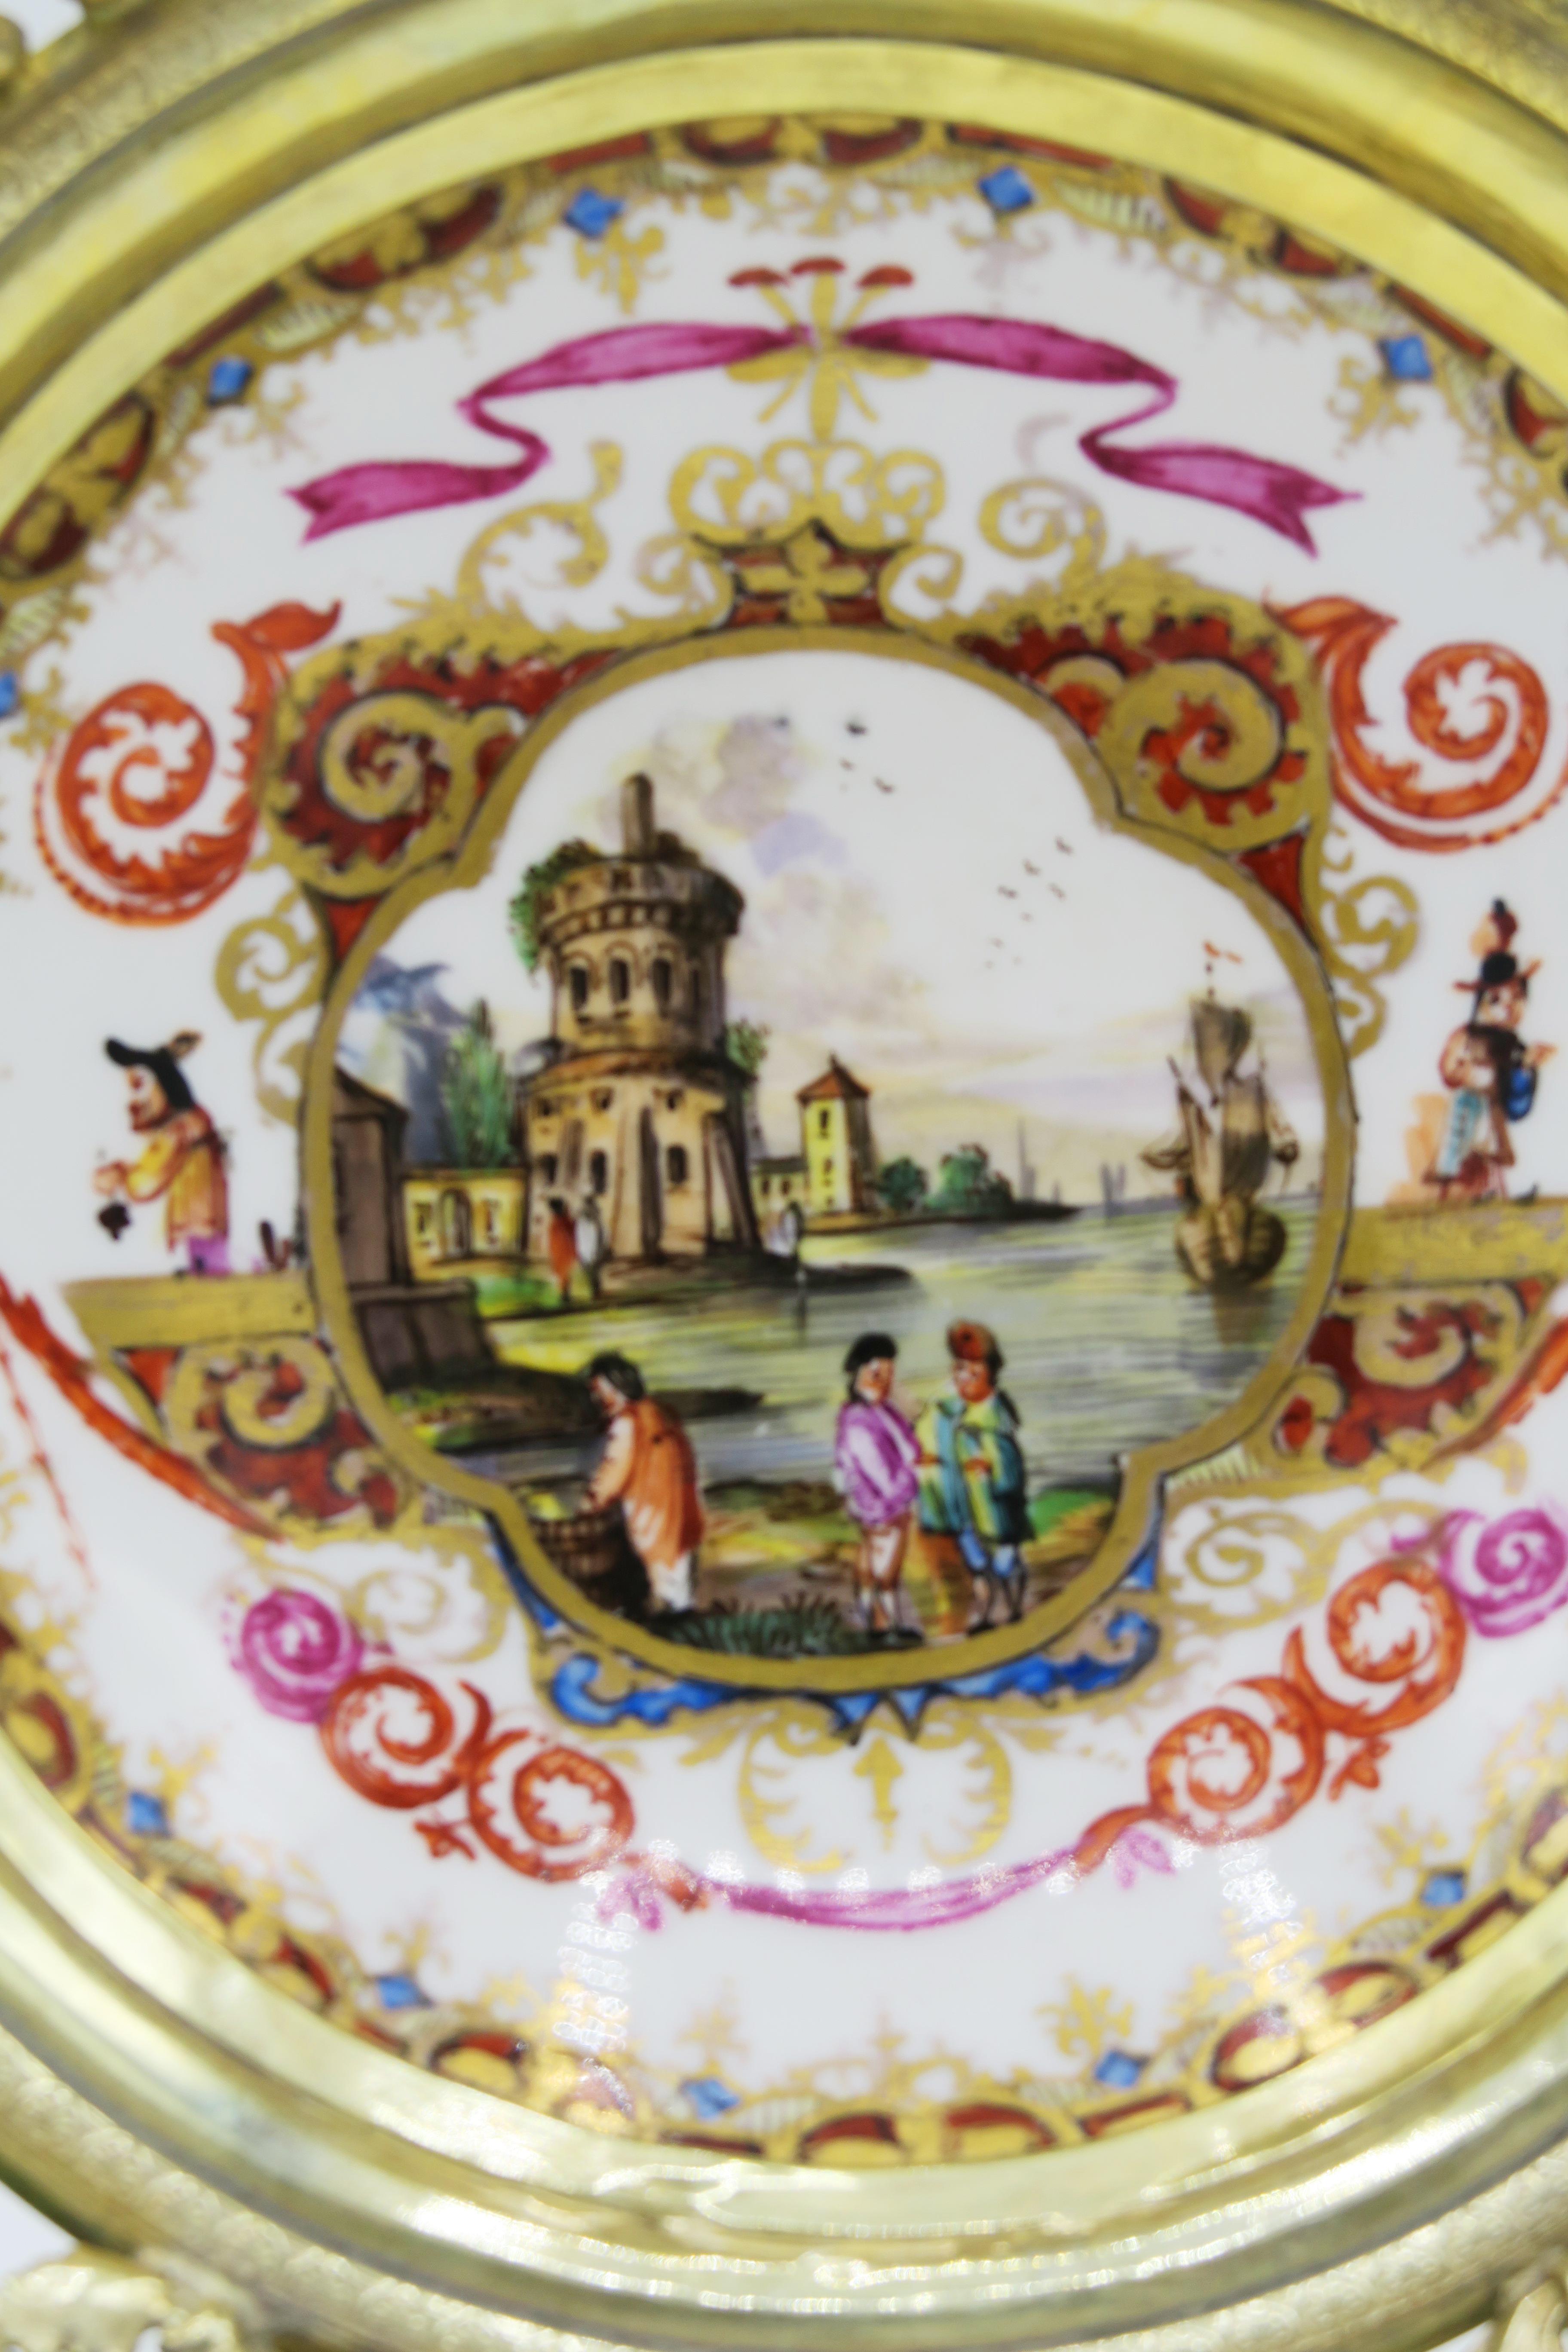 Mid-19th century Meissen plate with landscape painting and hollow gilded frame
In the middle of the plate is painted 